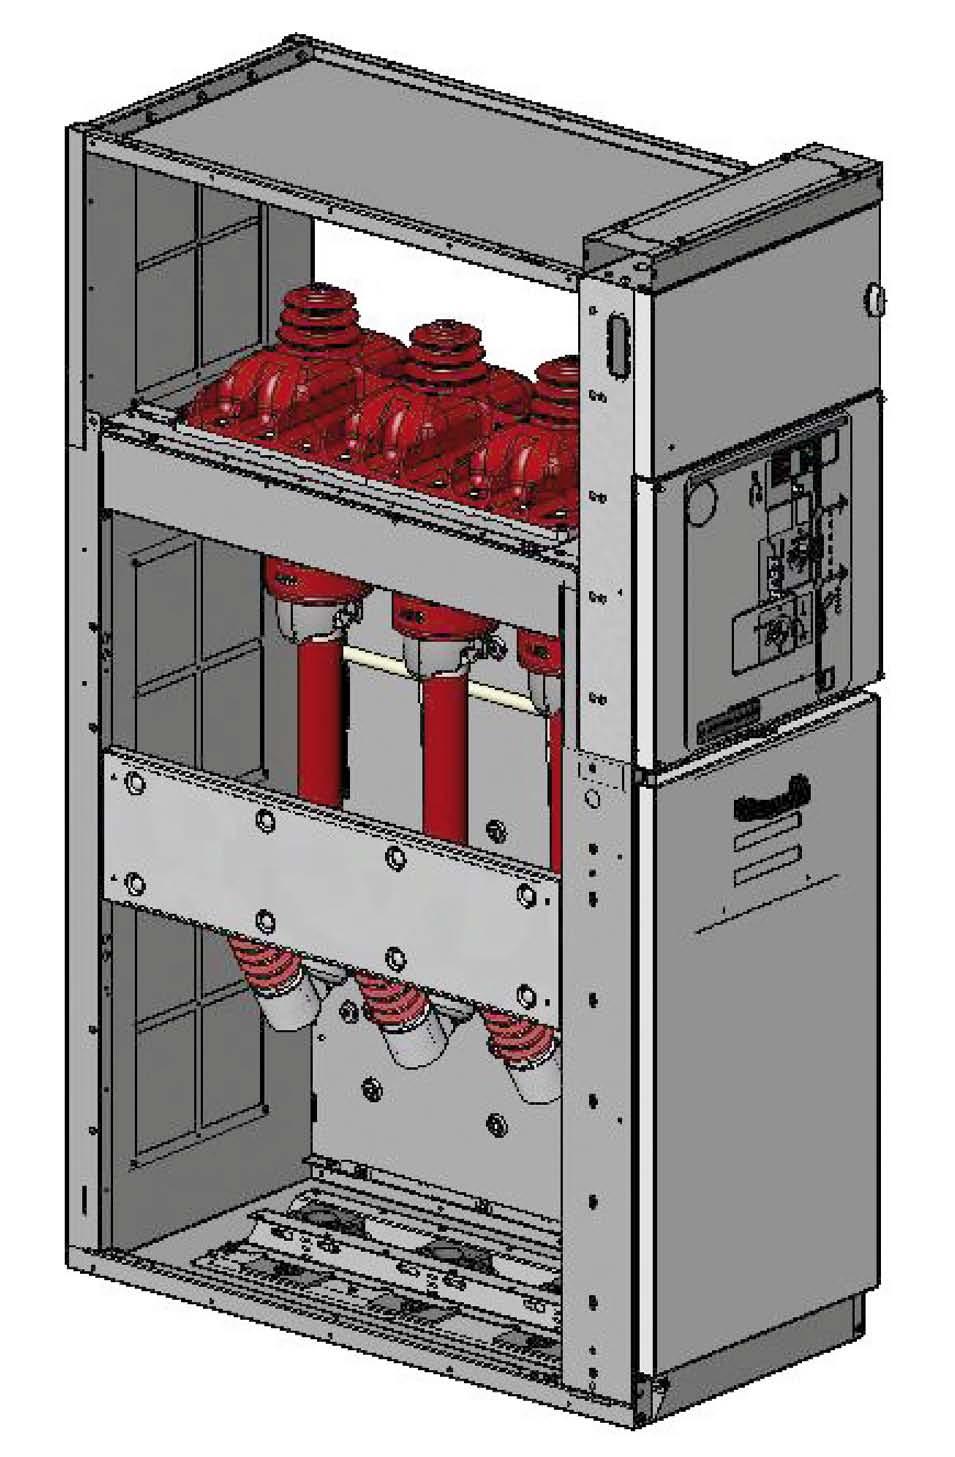 The first two types of accessible high voltage compartment are available to the user and are provided for normal operation and maintenance.